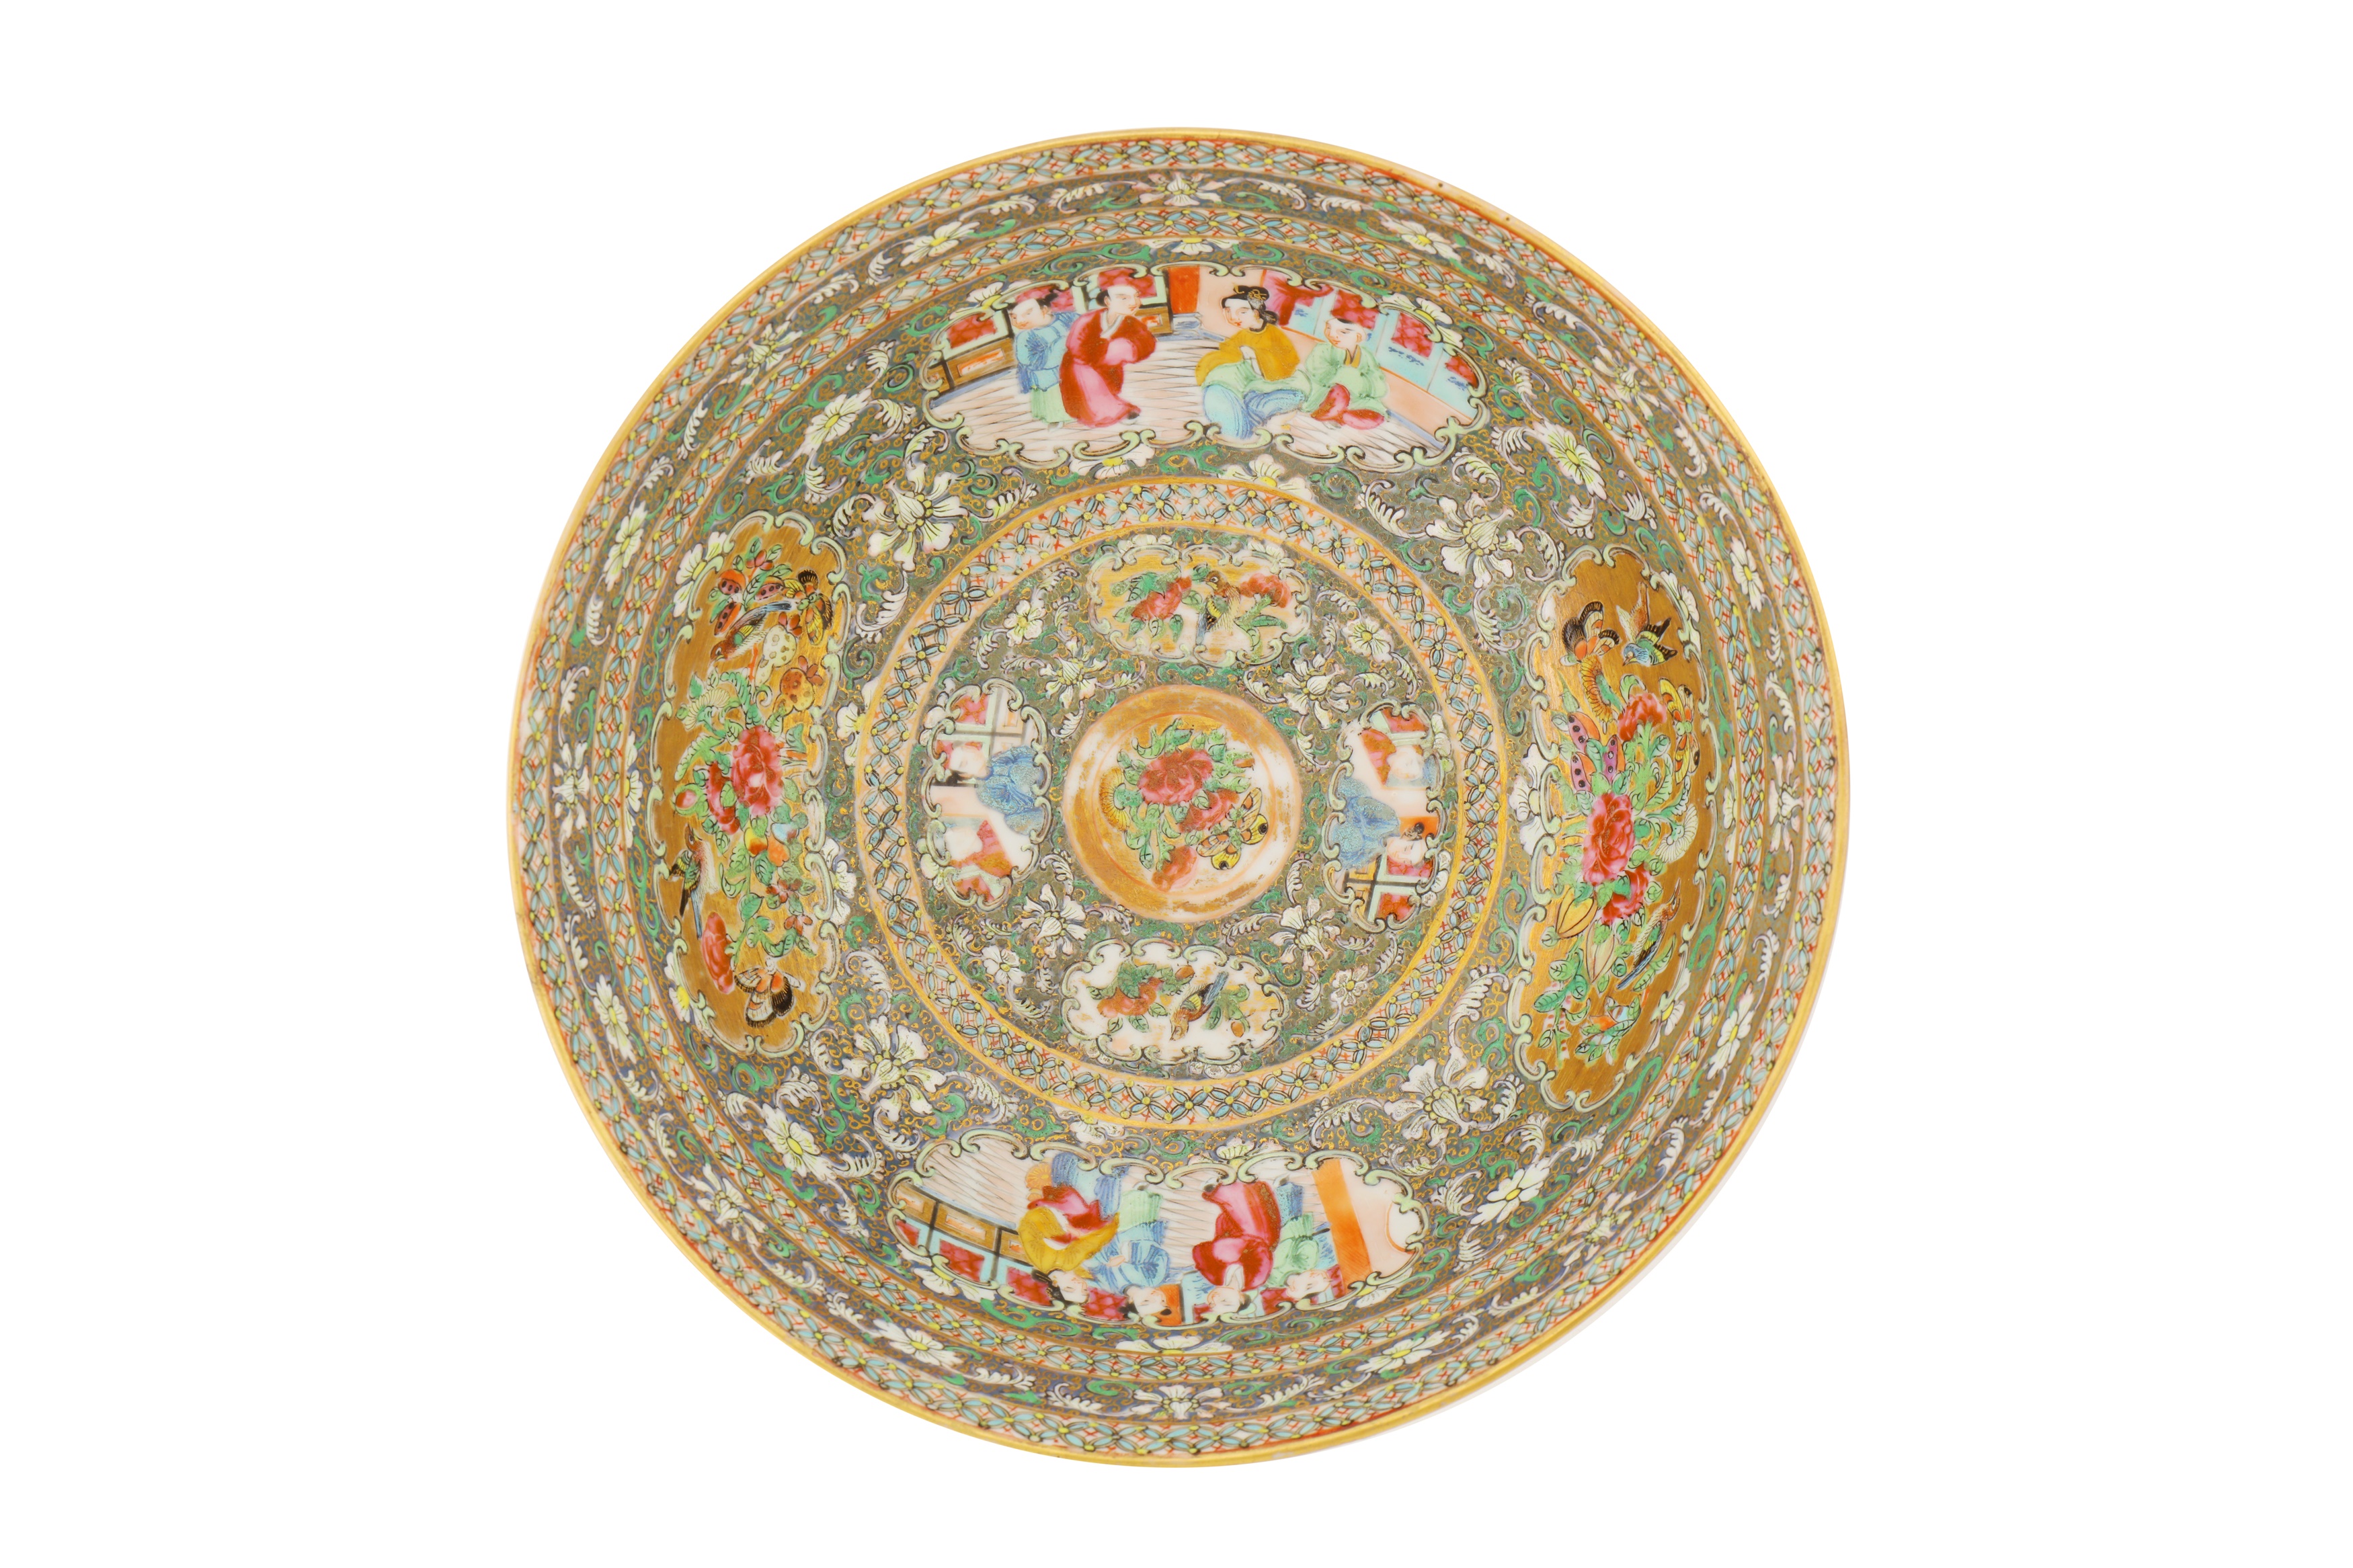 A MEDIUM SIZED BOWL AND DISH FROM THE ZILL AL-SULTAN CANTON PORCELAIN SERVICE - Image 7 of 8